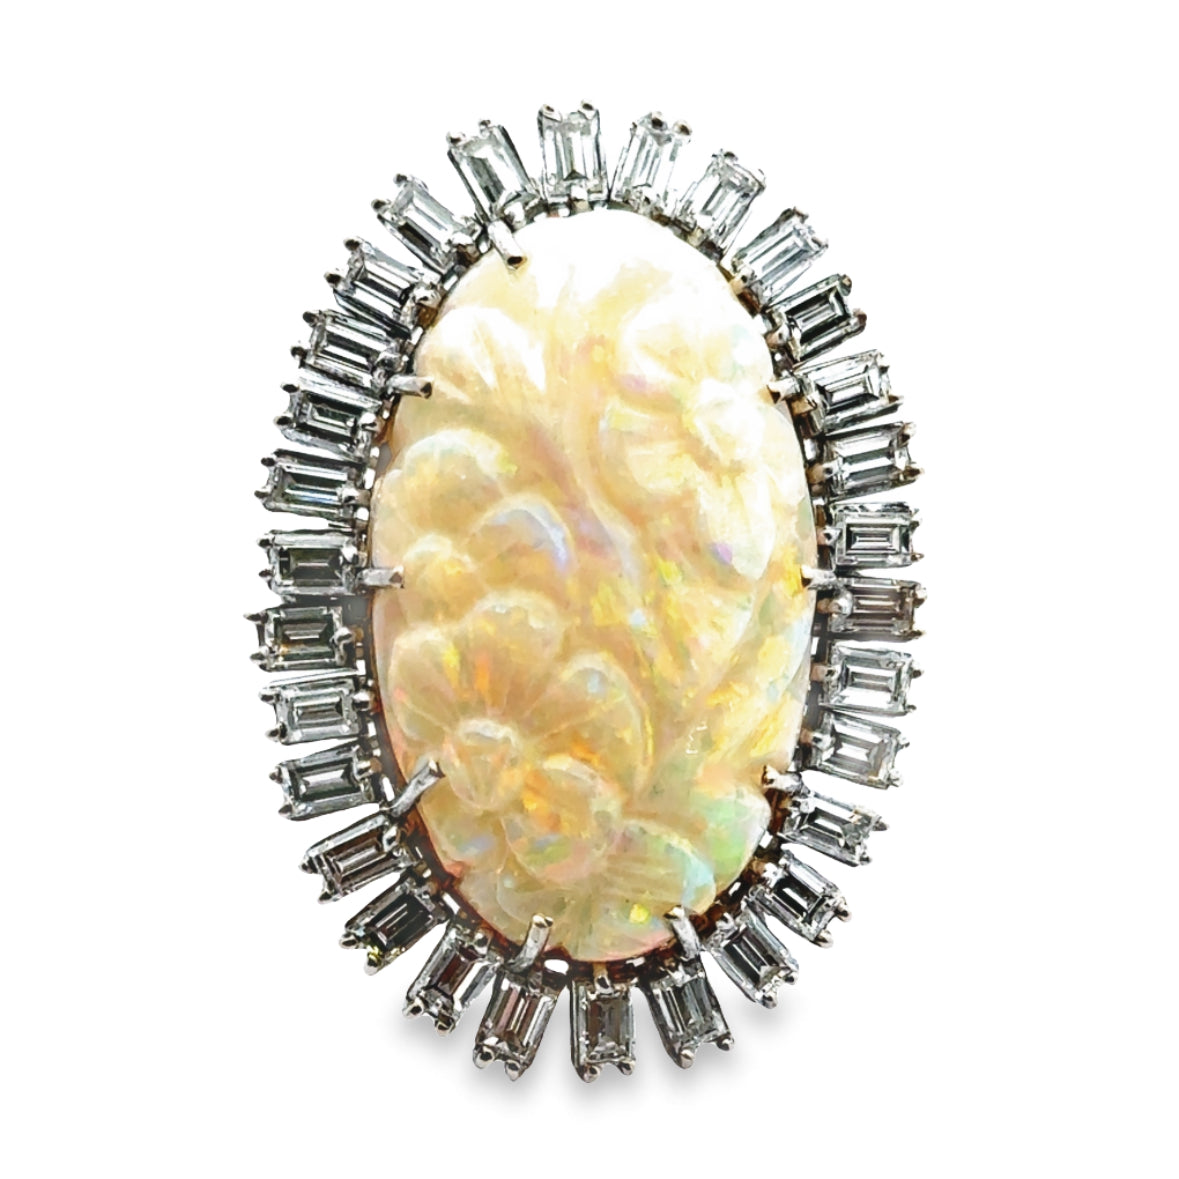 Stunning Estate Carved White Opal & Platinum Ring with a Halo of Diamonds